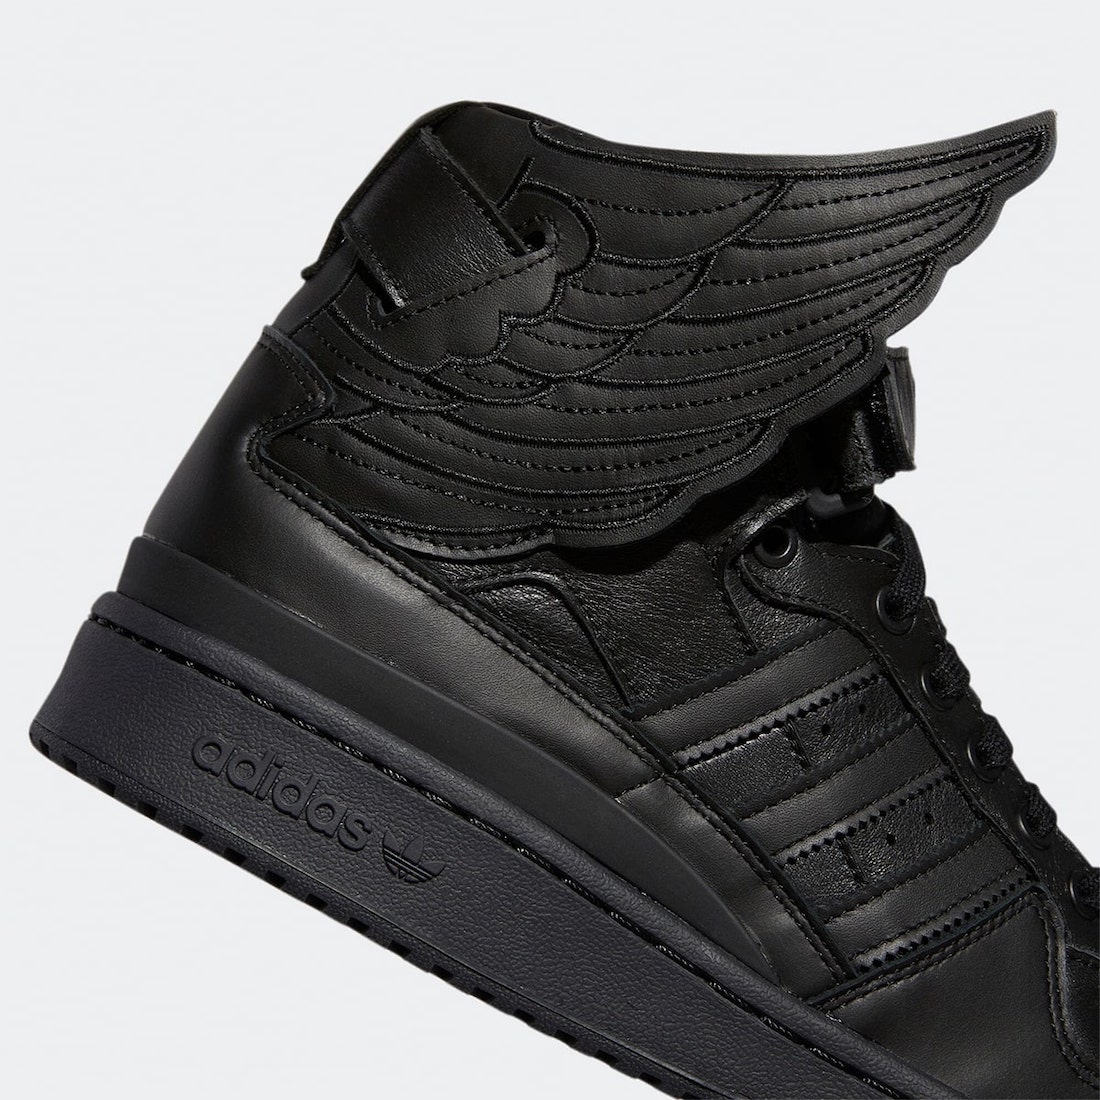 Jeremy Scott adidas music collaborations youtube playlist Wings 4.0 Black GY4419 Release Date